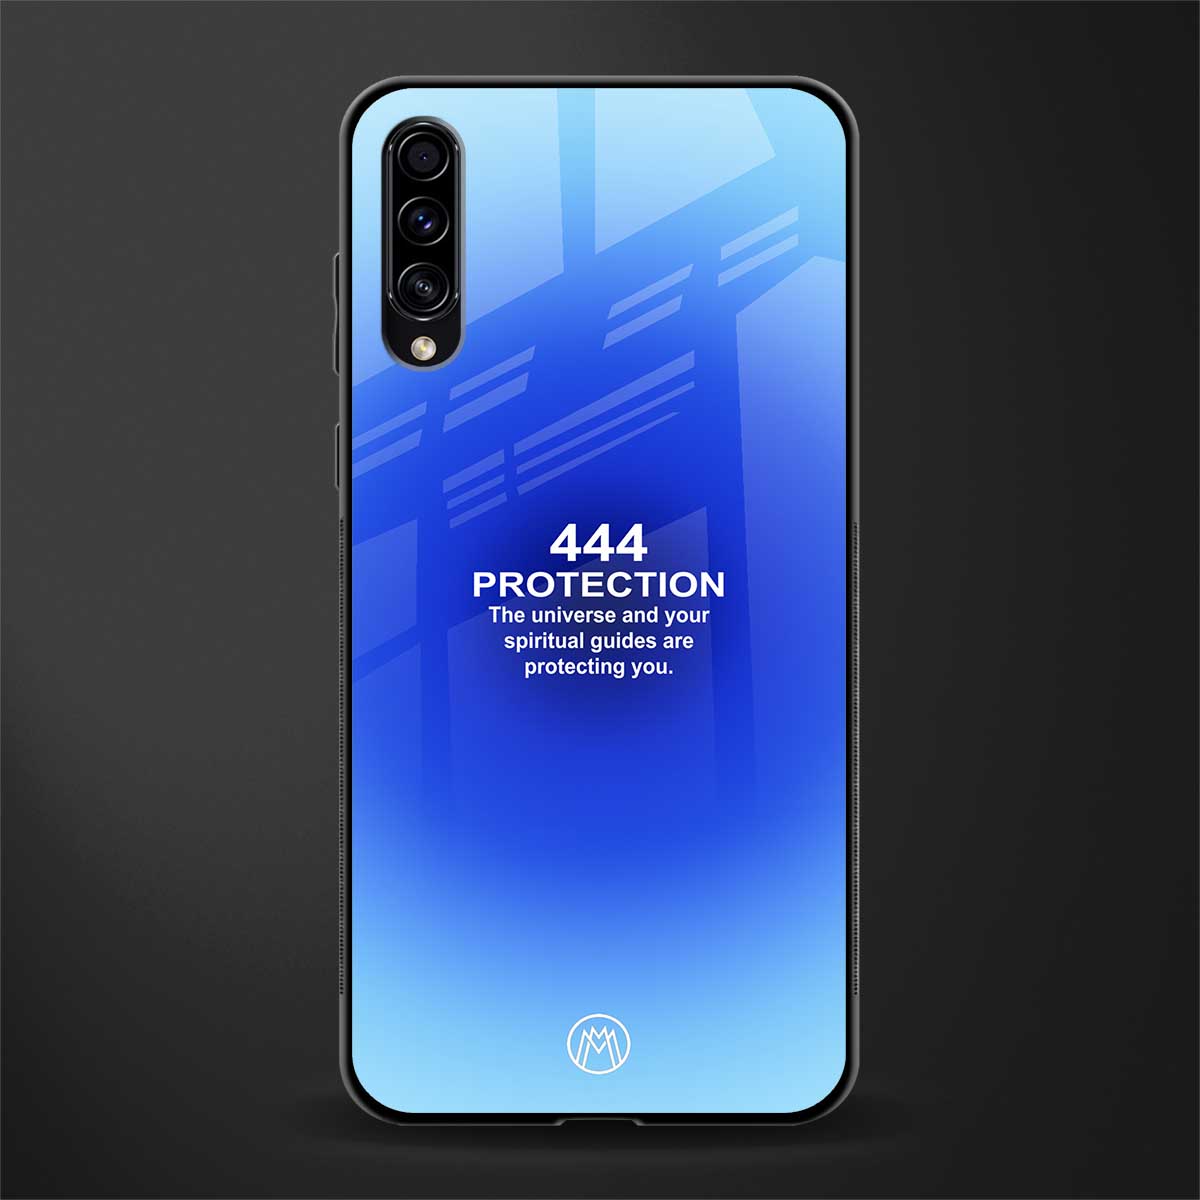 444 protection glass case for samsung galaxy a70s image